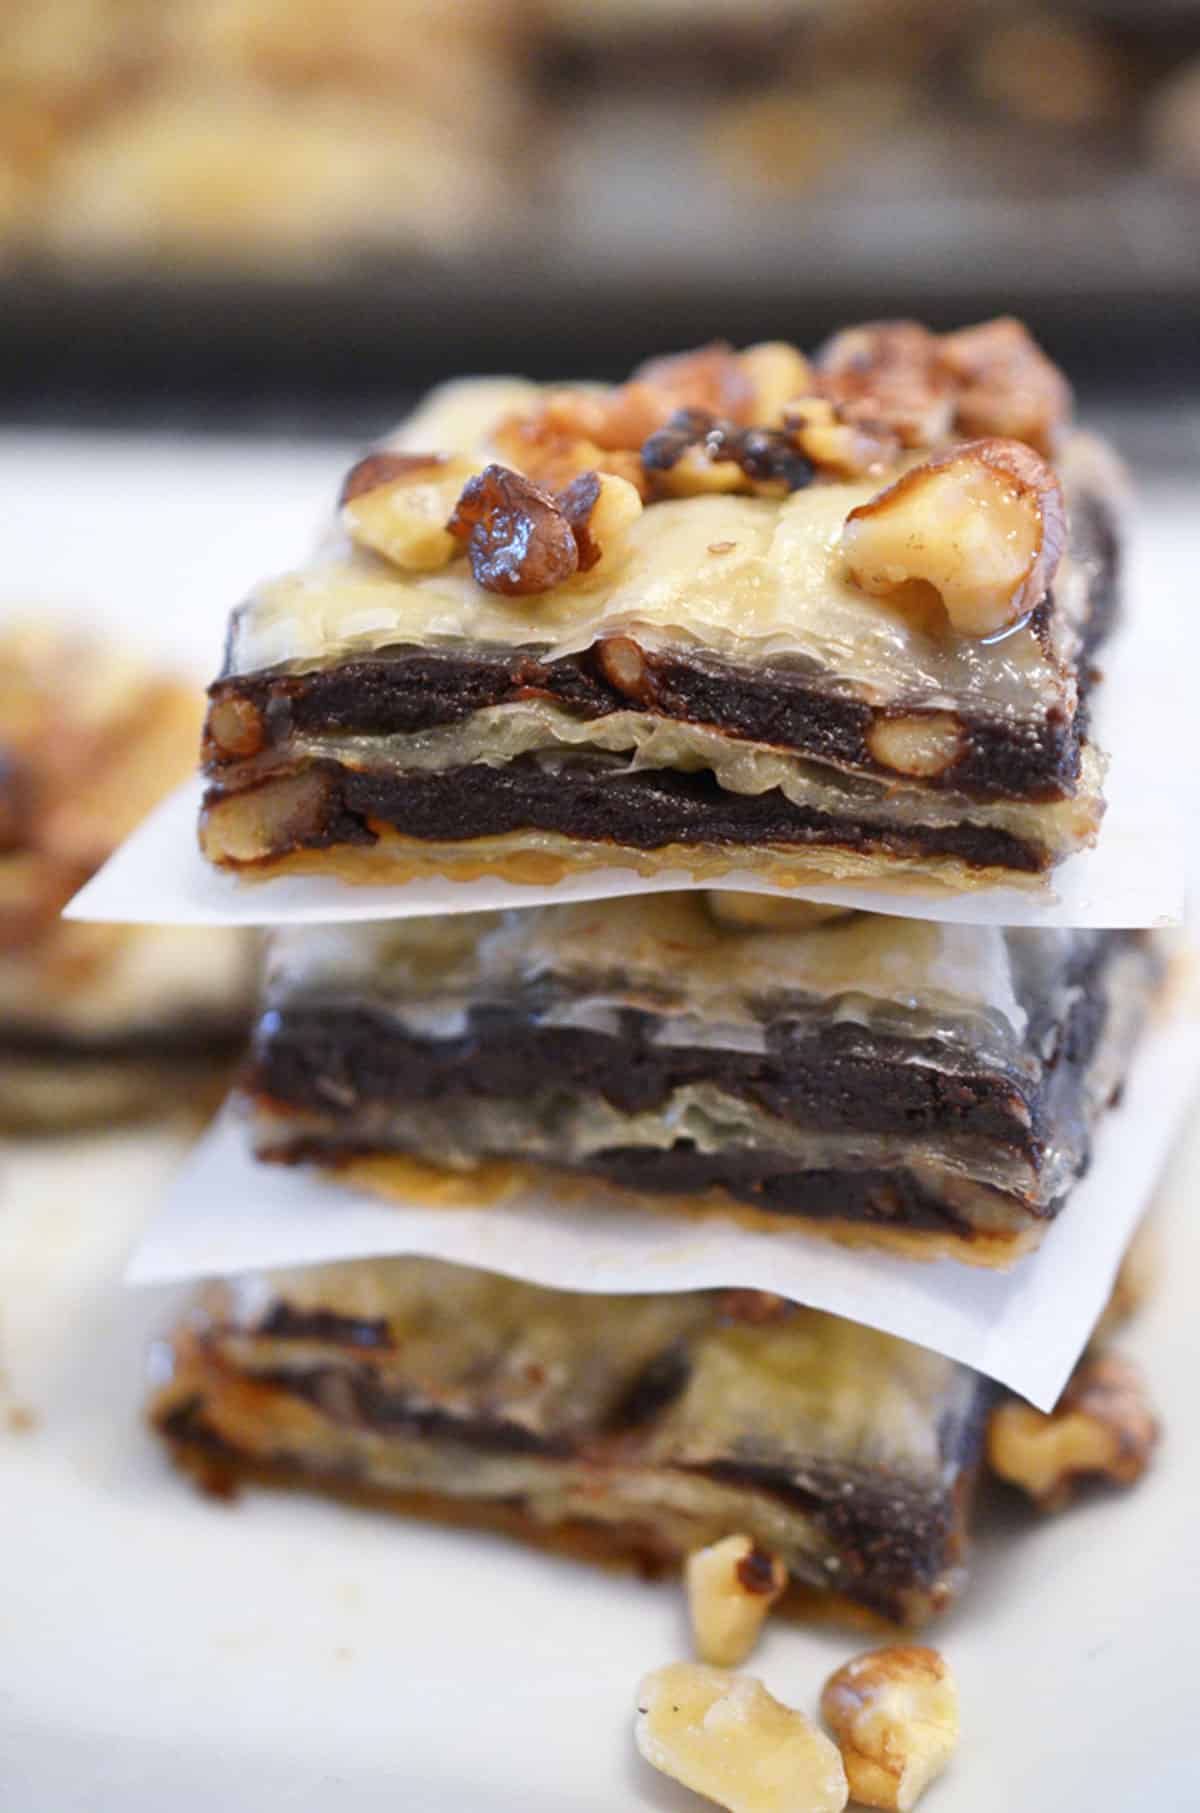 A stack of chocolate baklava.